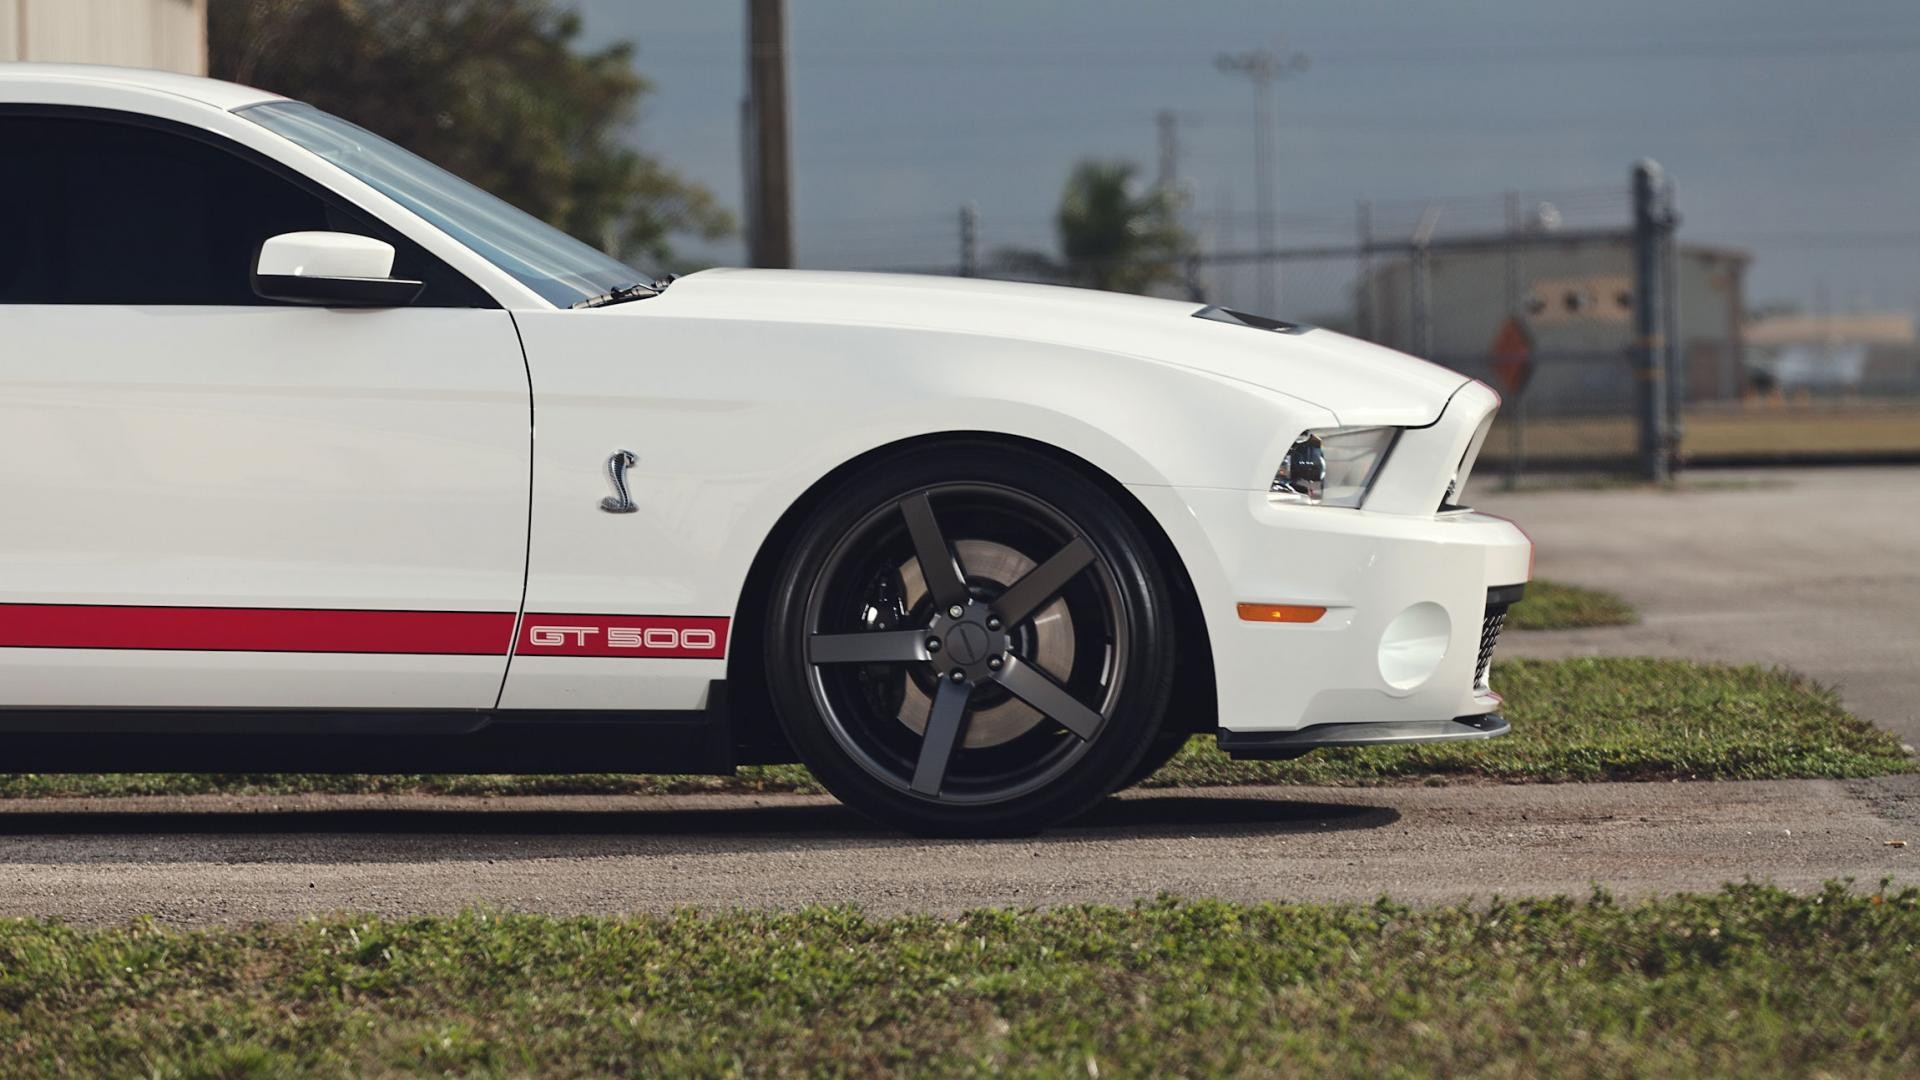 Vehicles Ford Mustang GT500 HD Wallpaper | Background Image